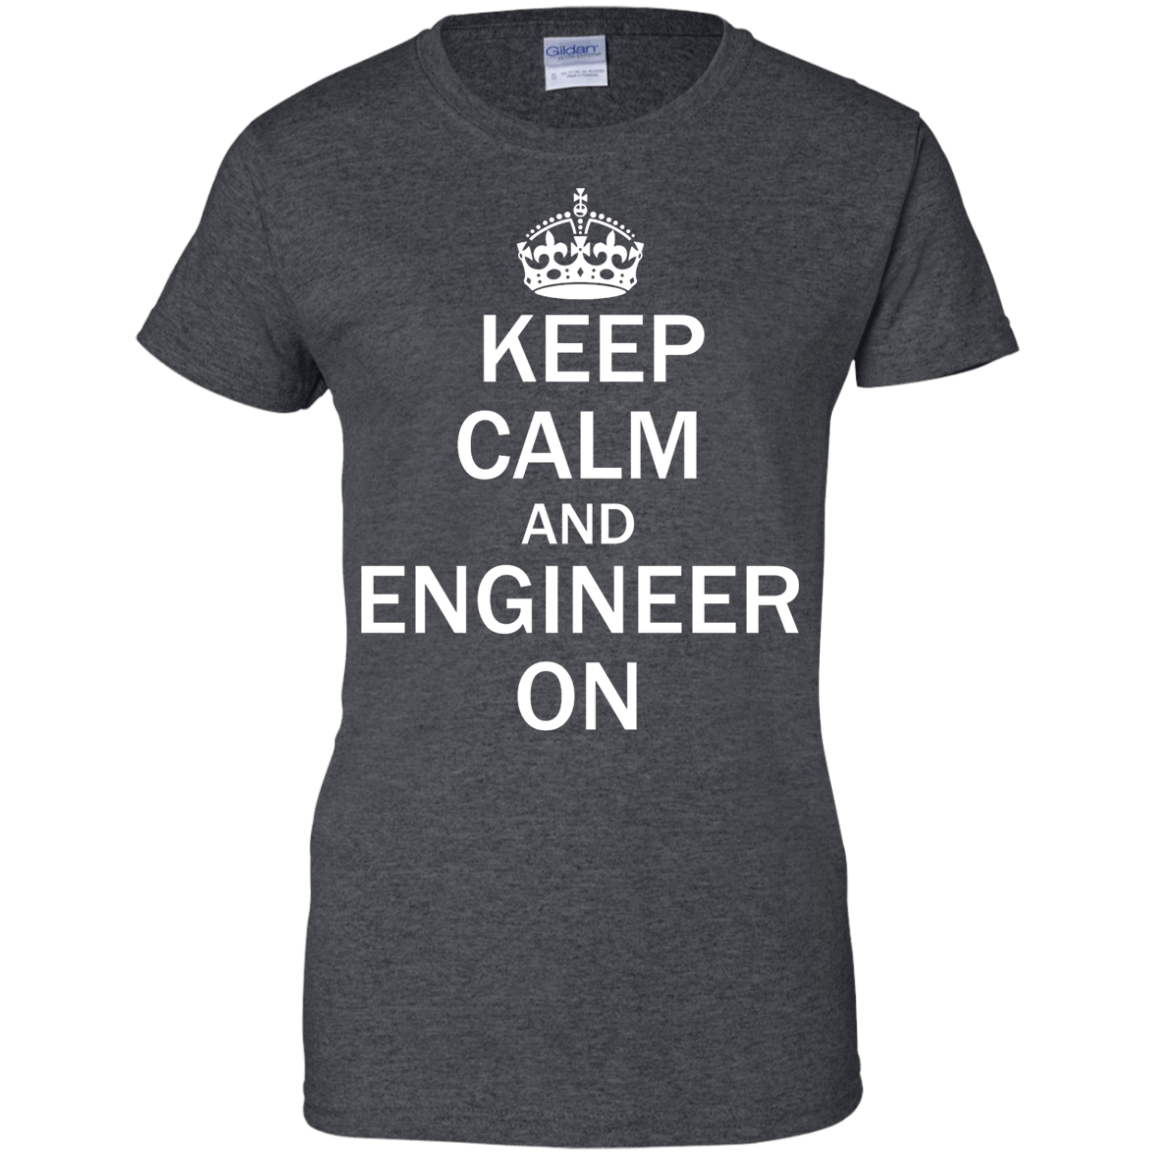 Keep Calm And Engineer On - Engineering Outfitters